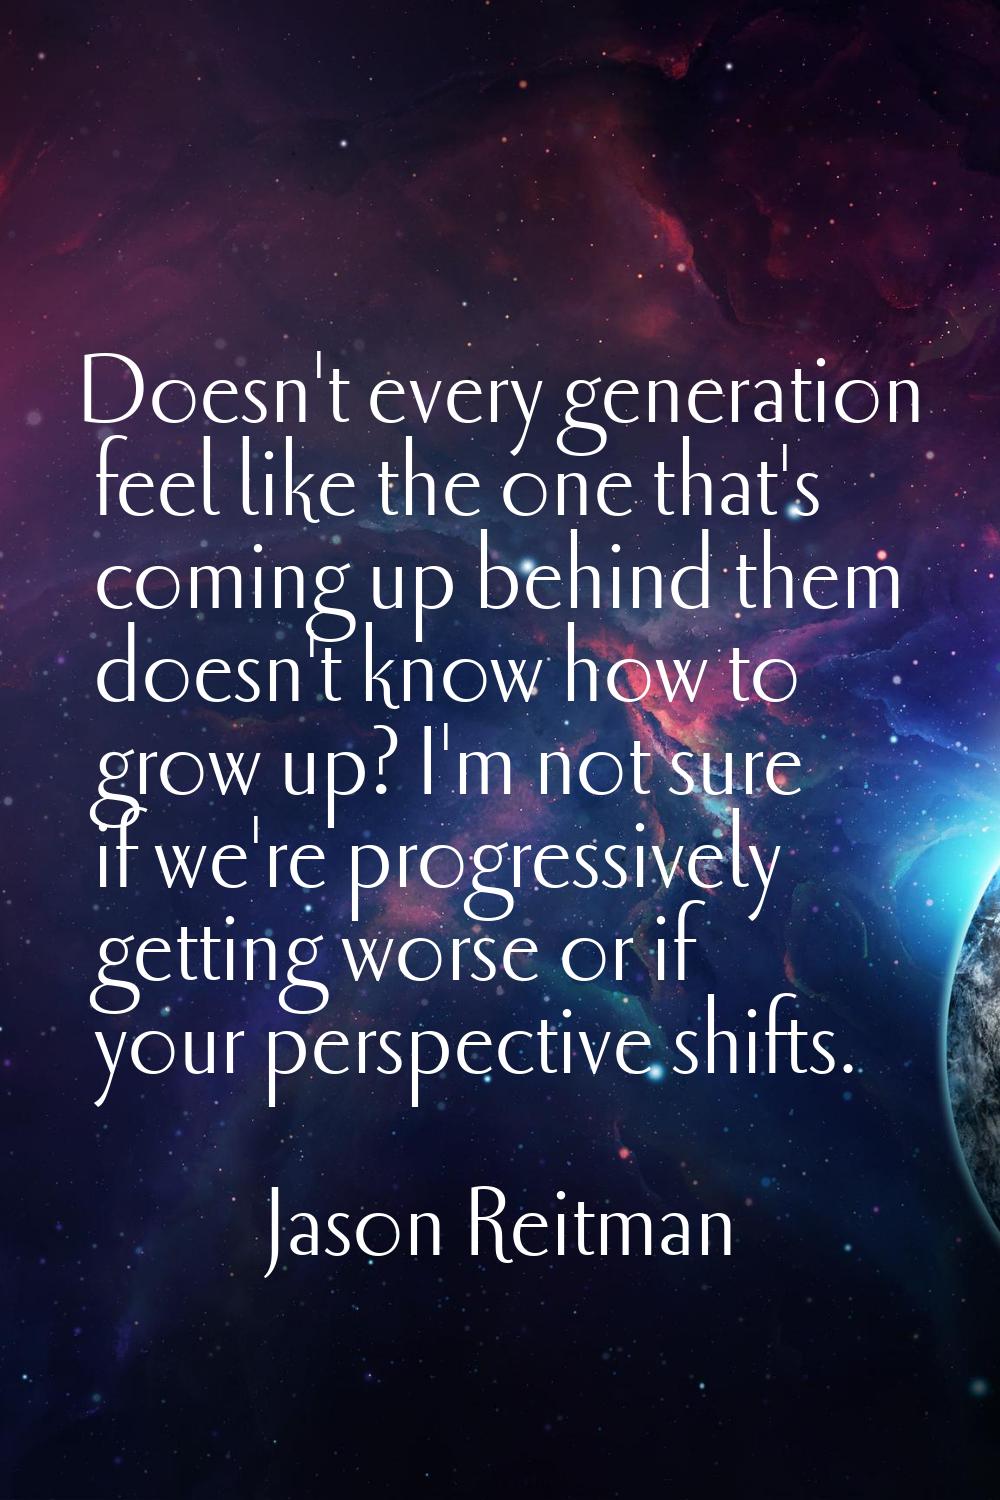 Doesn't every generation feel like the one that's coming up behind them doesn't know how to grow up